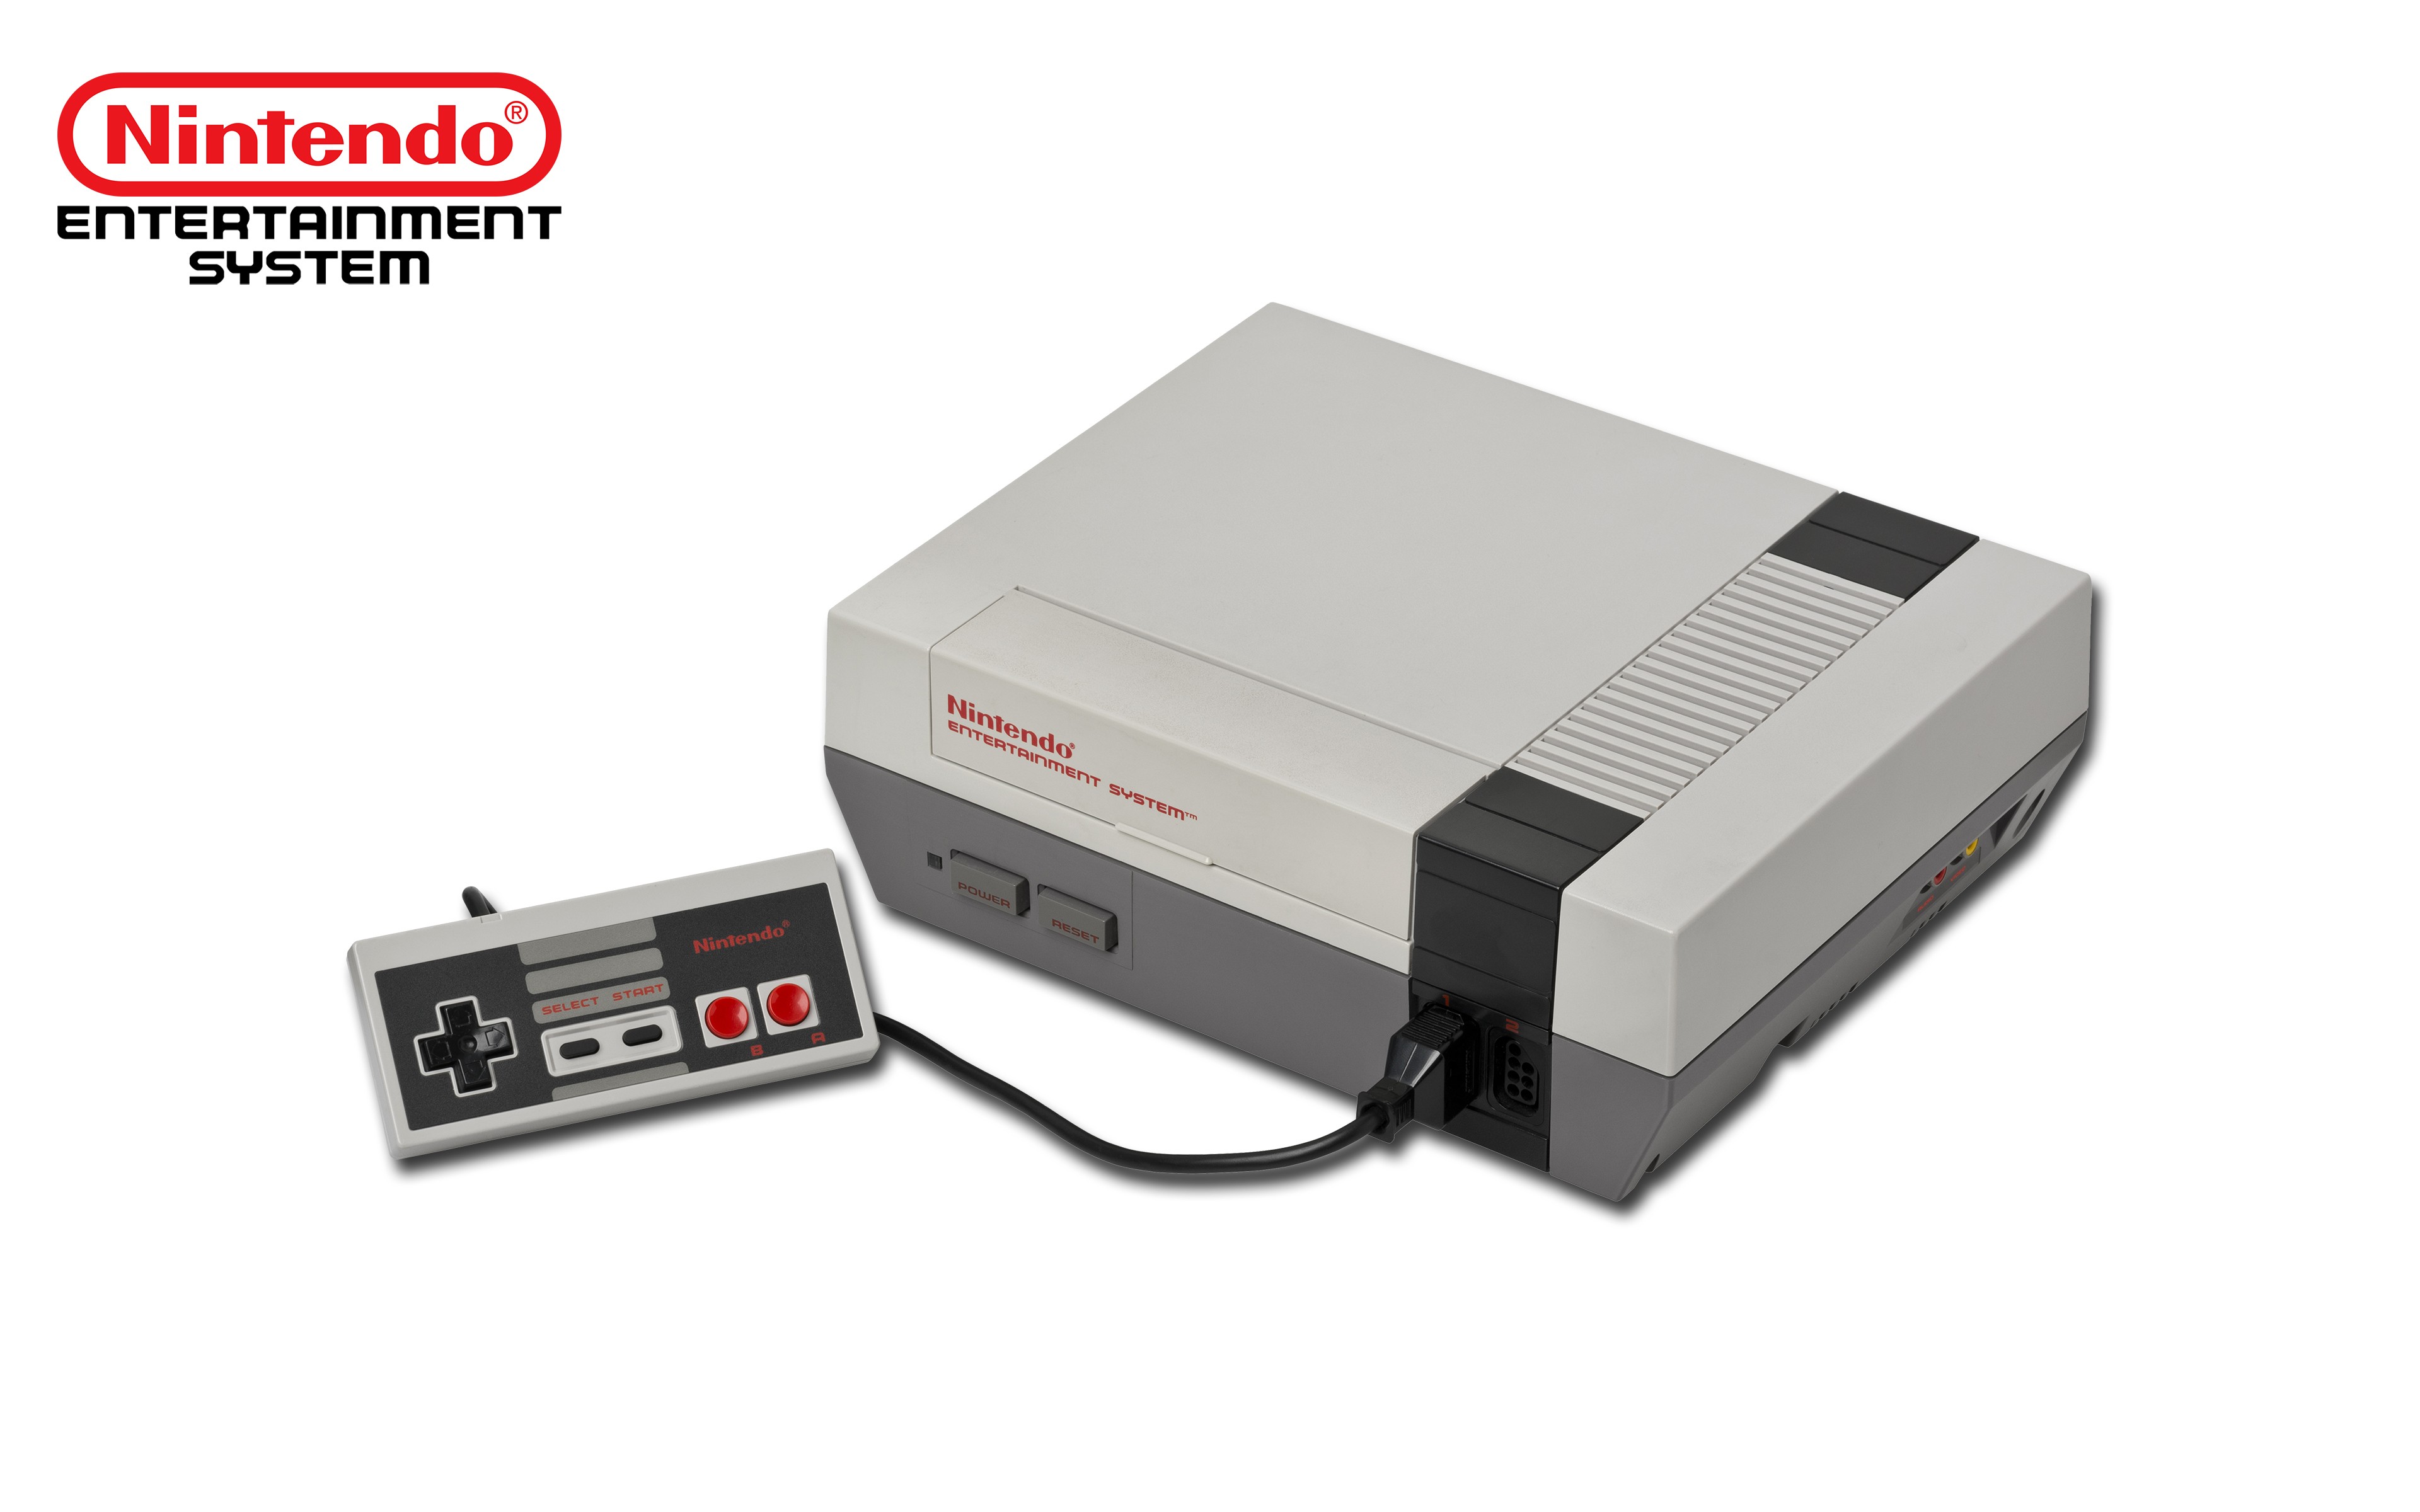 Nintendo Entertainment System, Consoles, Video Games, Simple Background Wallpaper